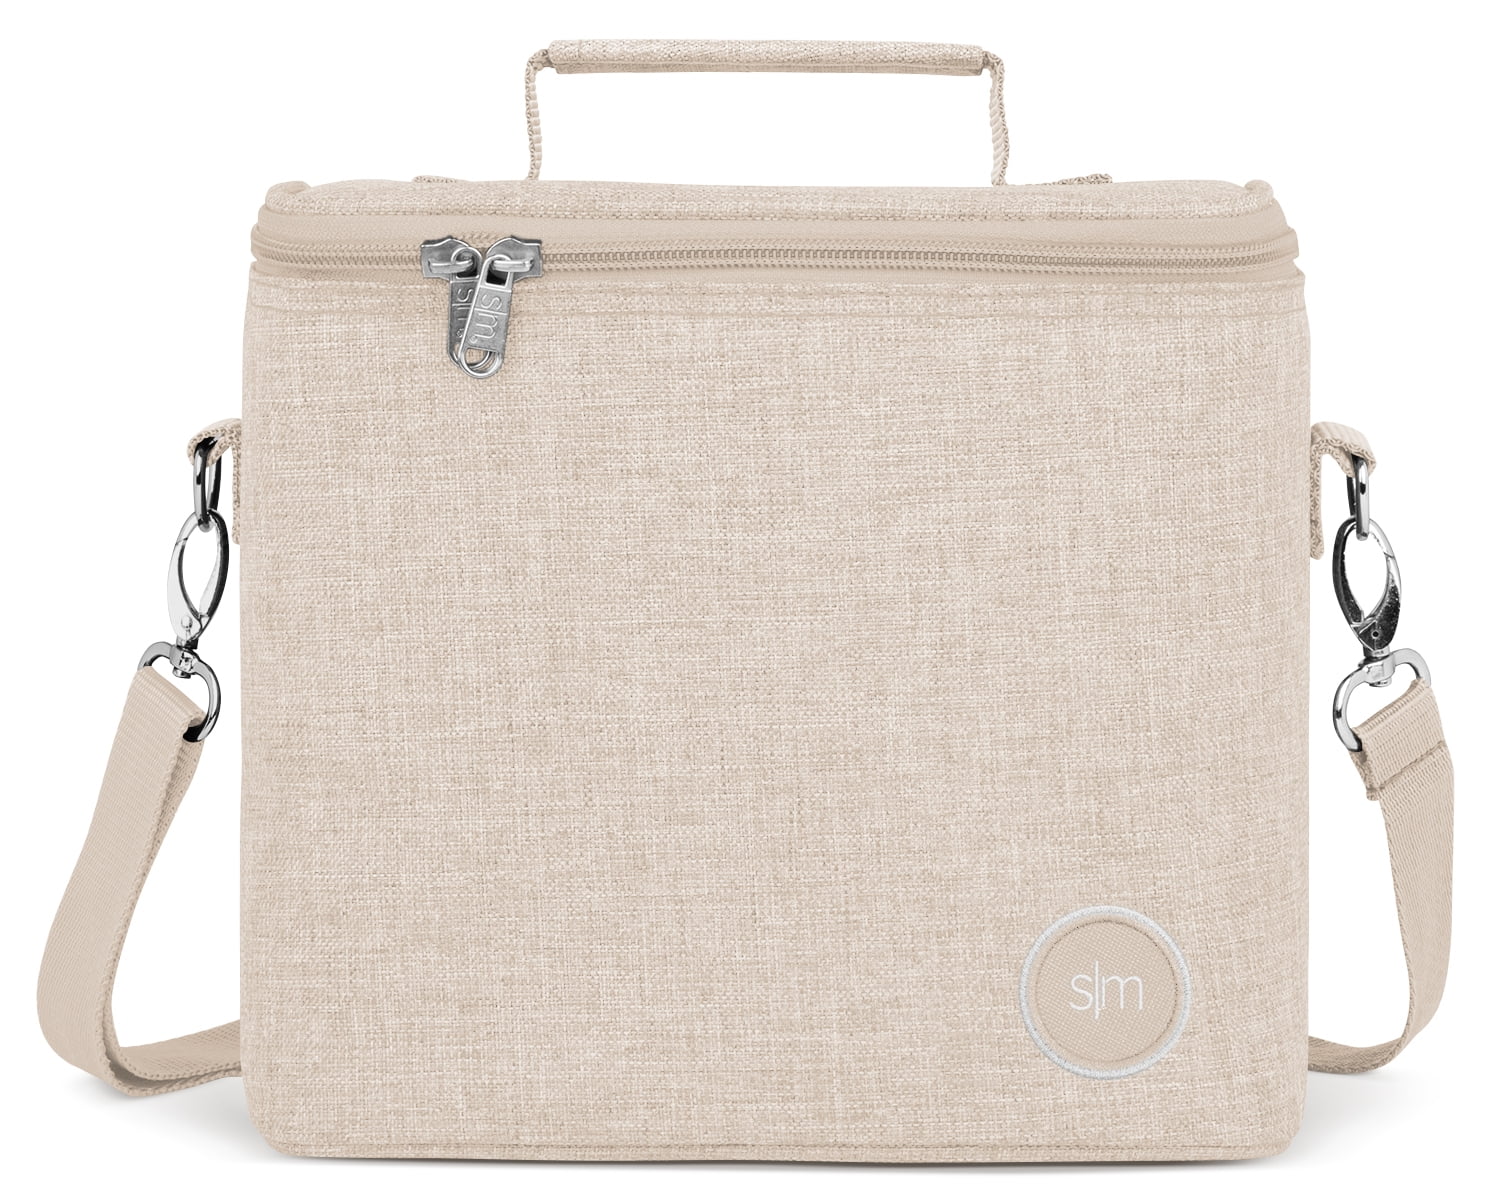 Simple Modern 4L Blakely Lunch Bag for Women & Men - Insulated